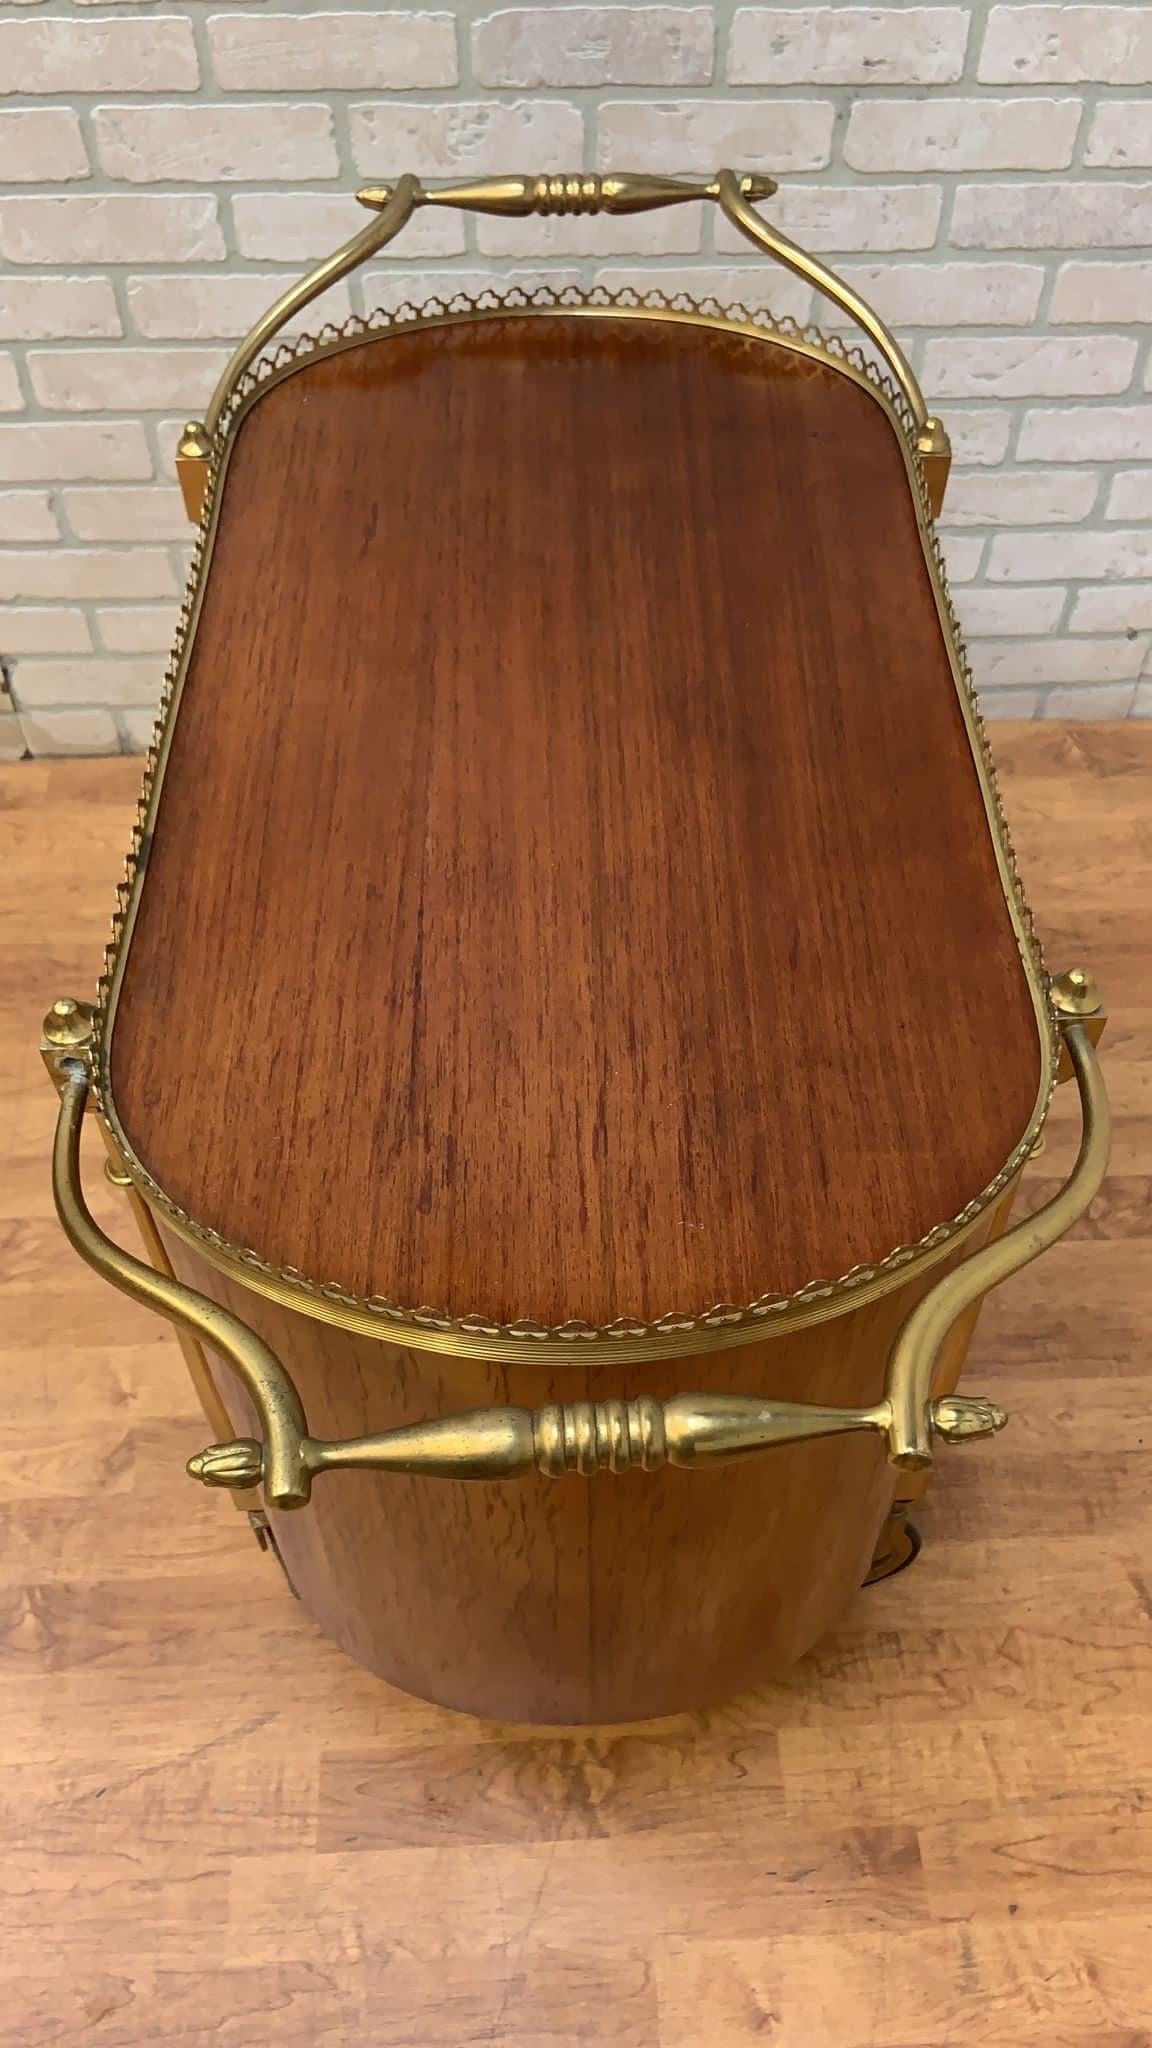 Vintage French Art Deco Style Brass & Wood Bar Cart

Beautiful Art deco wood and brass rolling bar cart. Oval top with all around brass gallery and 2 handles. The cabinet has brass bottle holders. 

Circa Mid 20th Century 

Dimensions 

W 34”
D